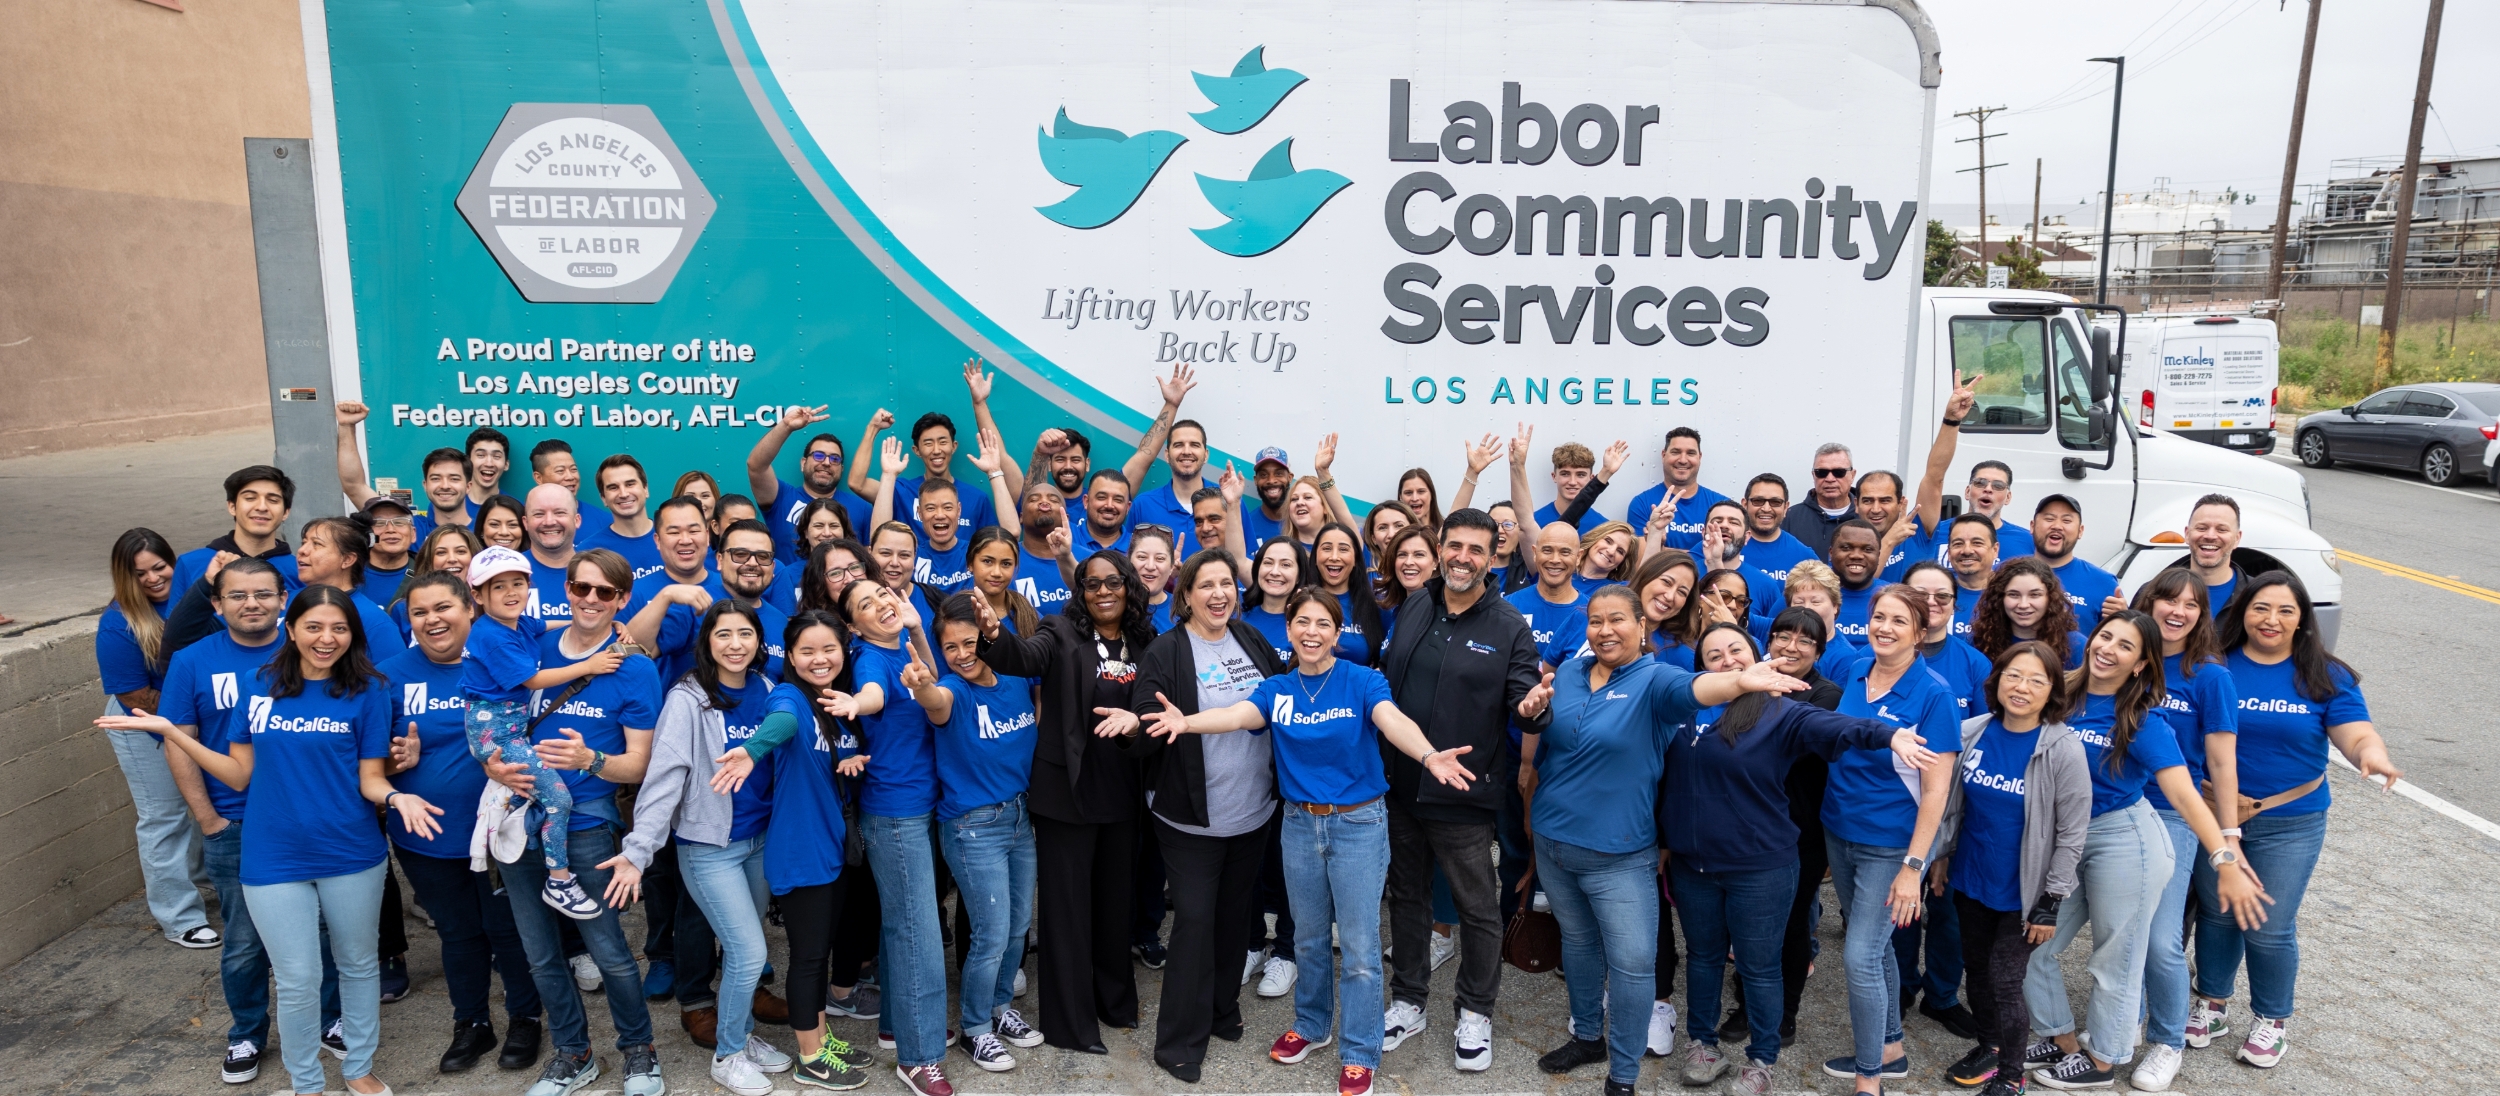 A group of SoCalGas employees are standing in front of a labor community services van.